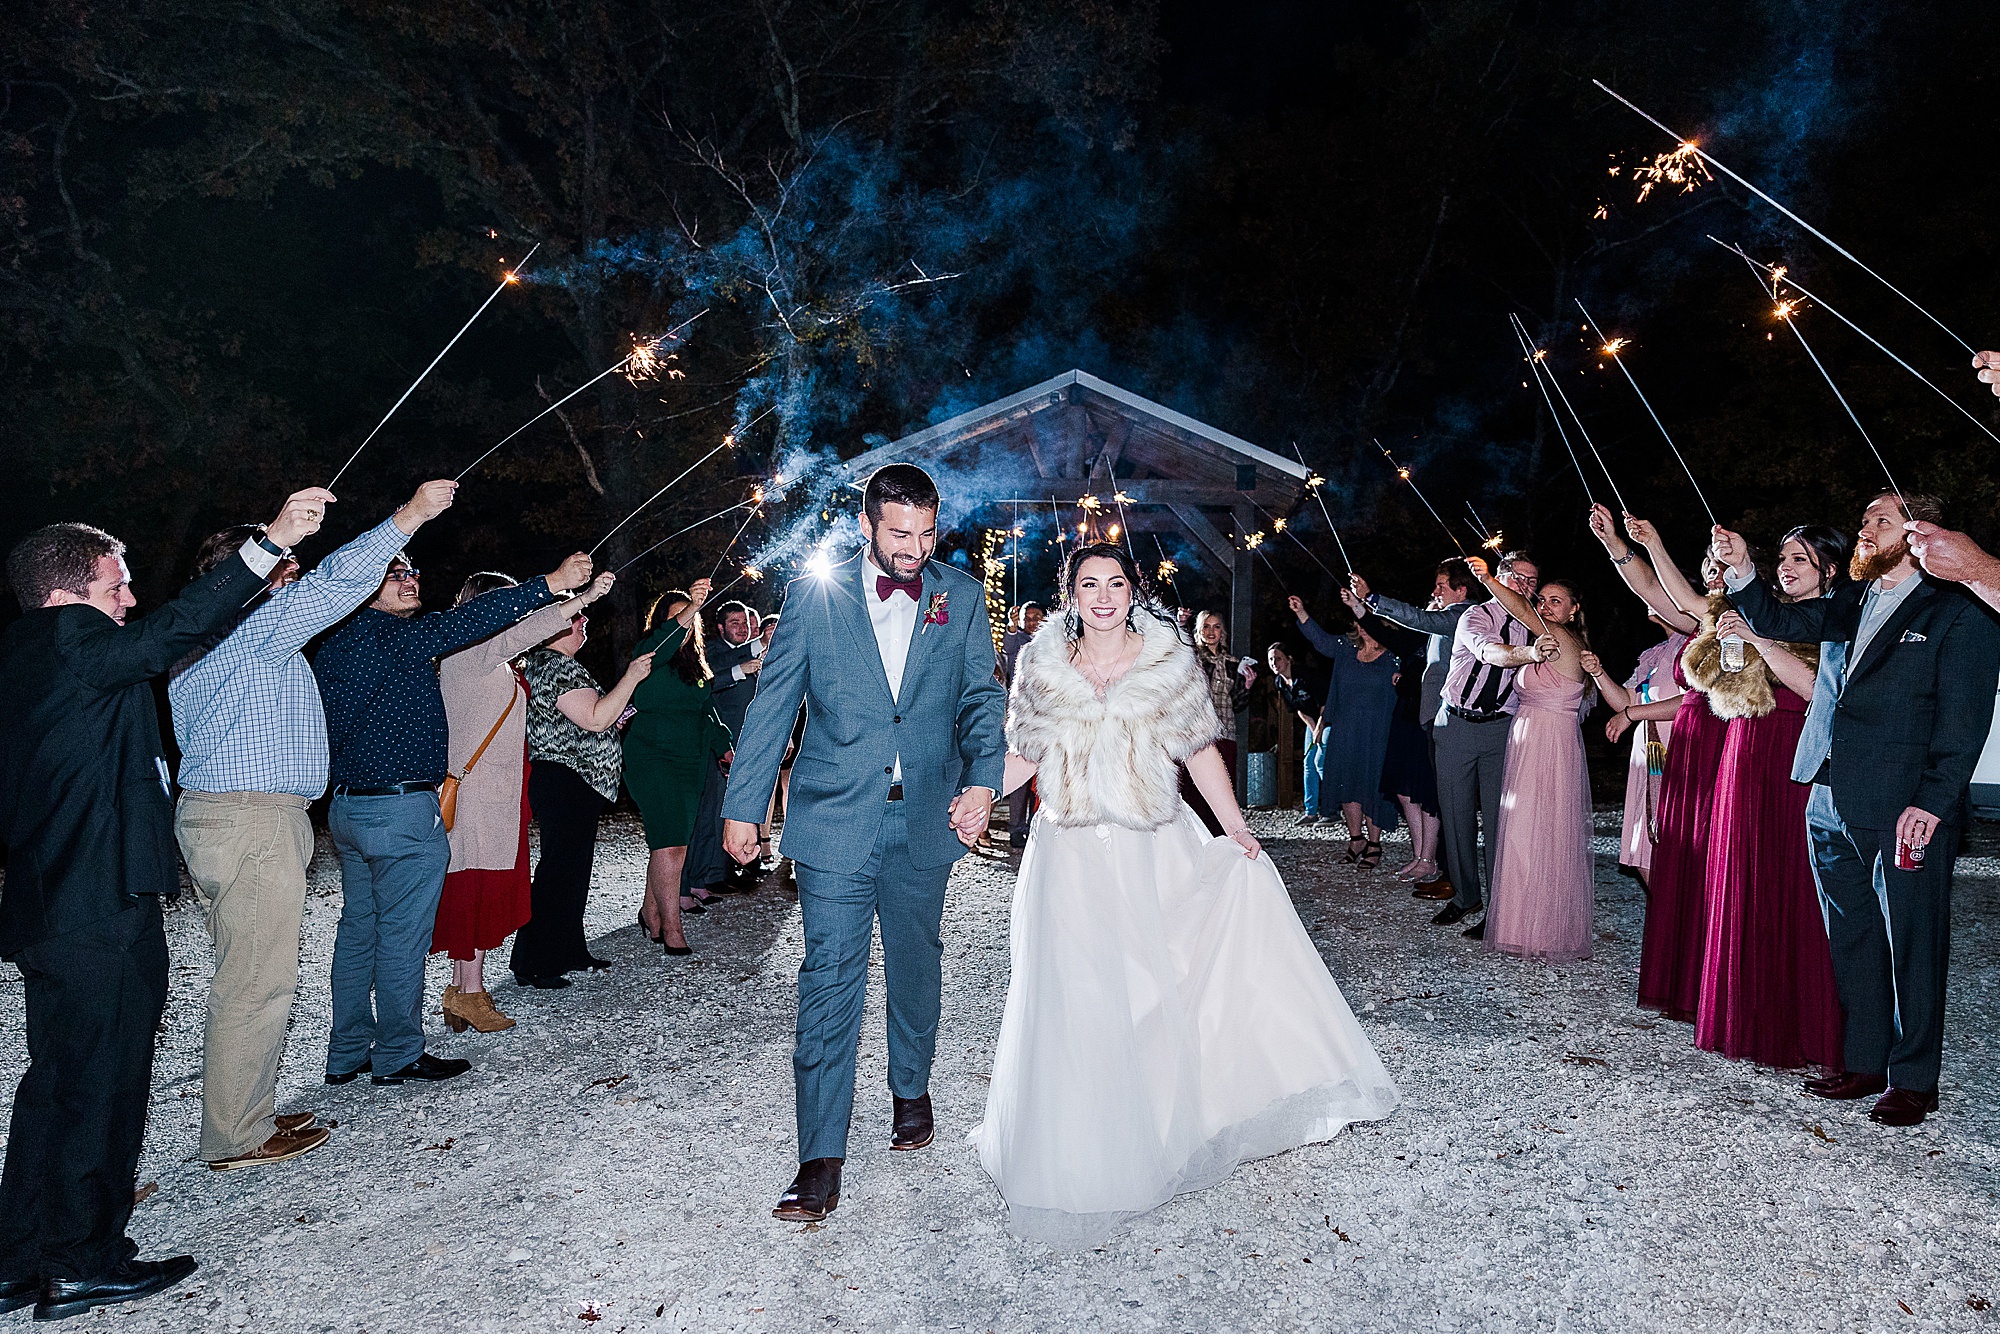 newlyweds leave wedding reception at Whispering Oaks in sparkler exit